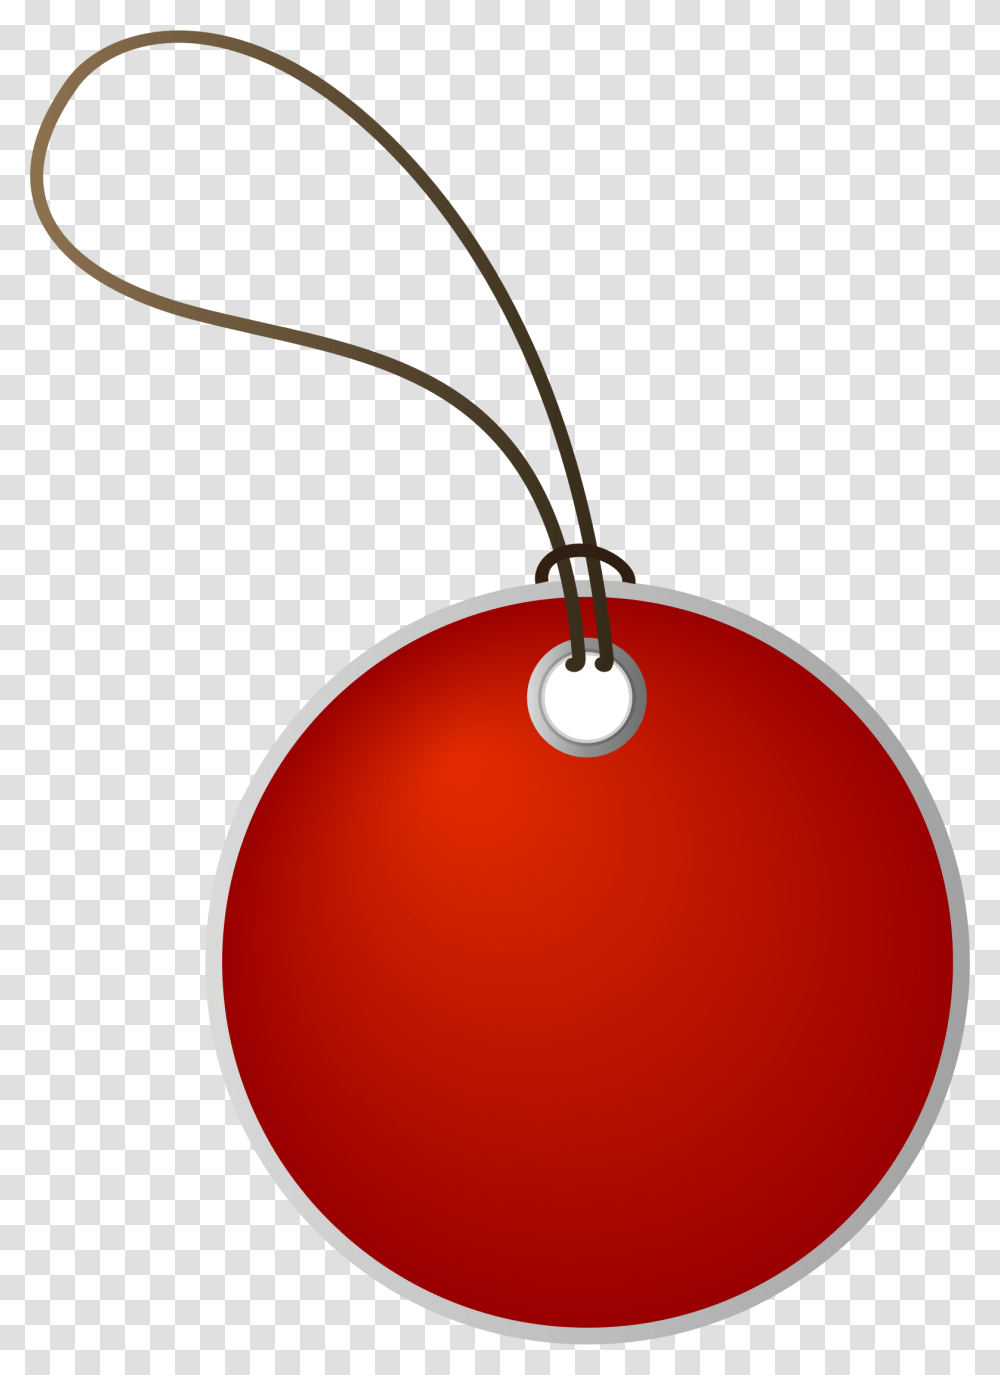 Background Price Tag, Plant, Lamp, Tree, Ornament Transparent Png